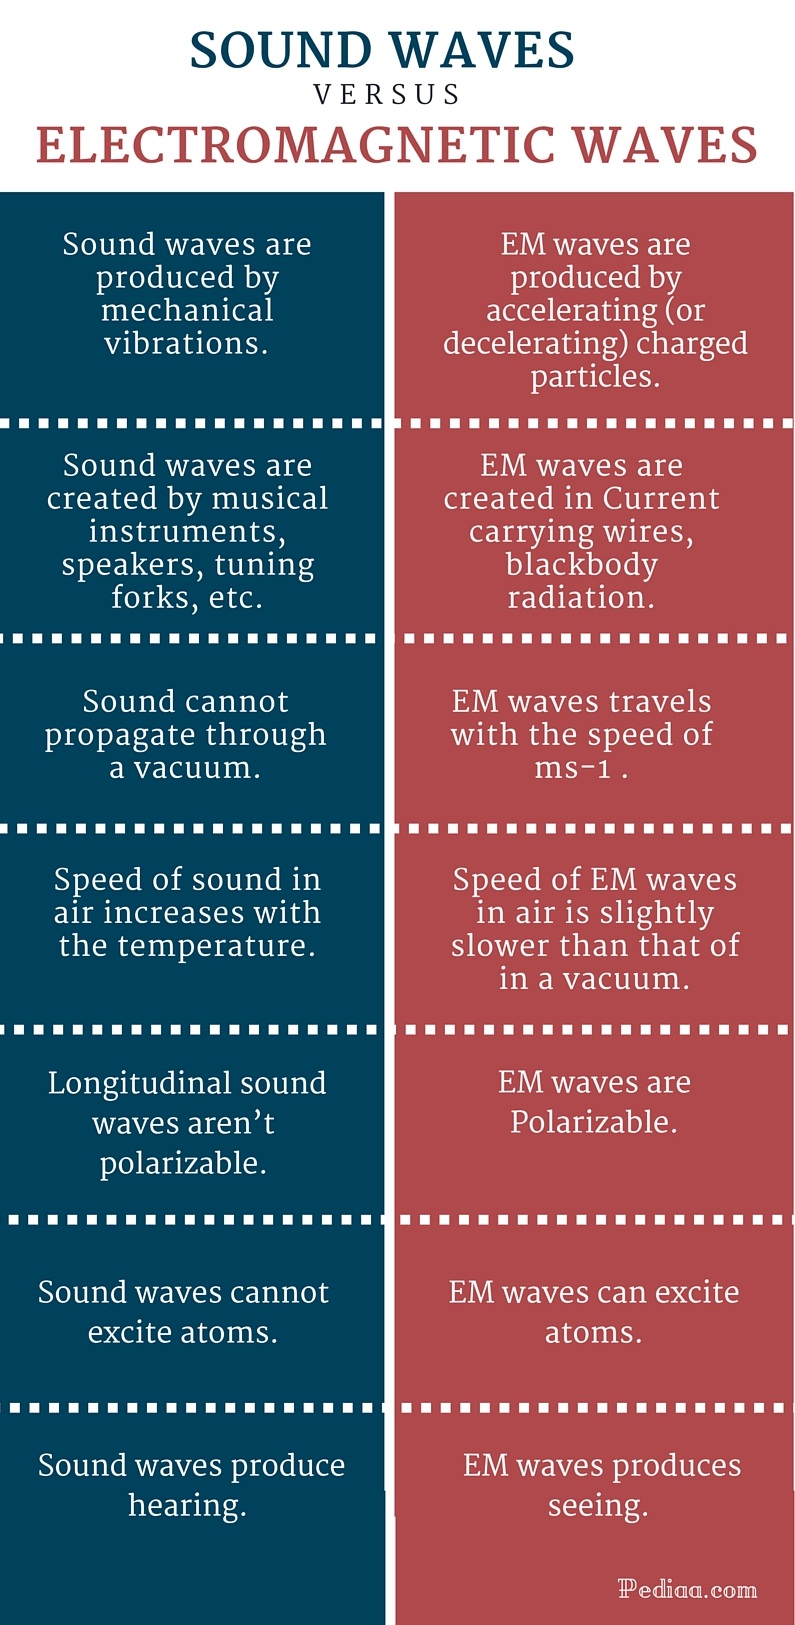 Sound Waves and Electromagnetic Waves differences